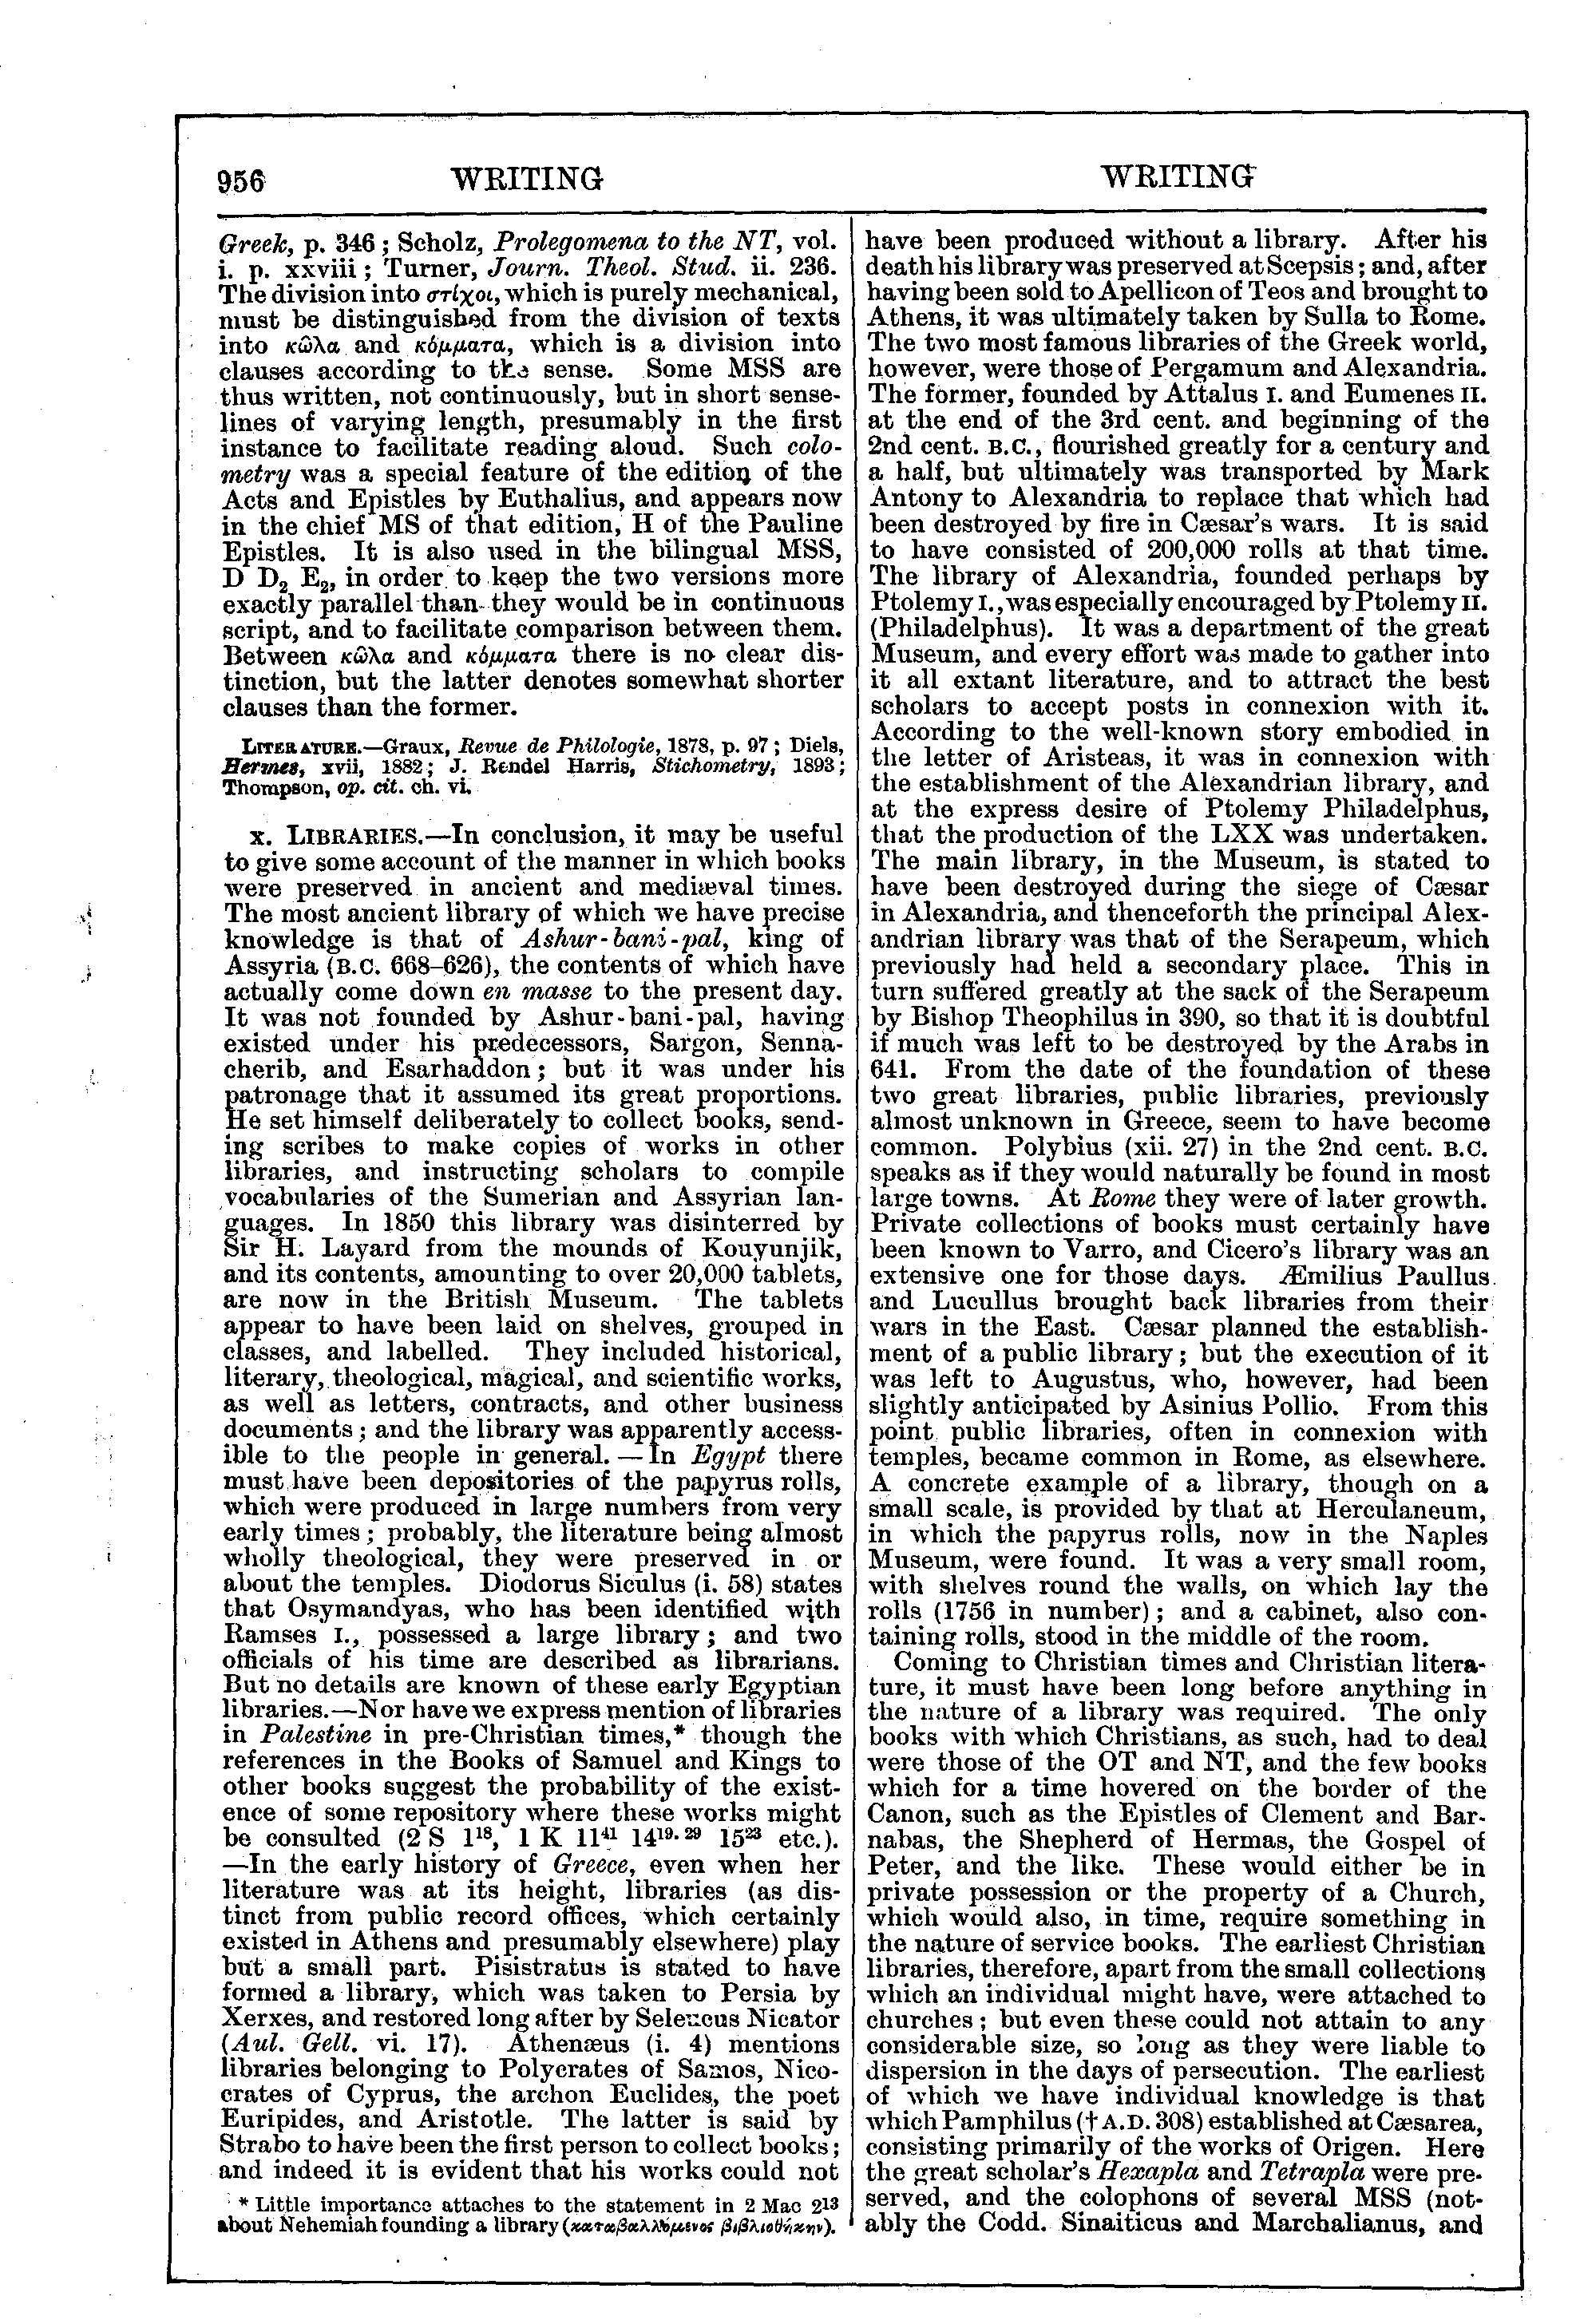 Image of page 956